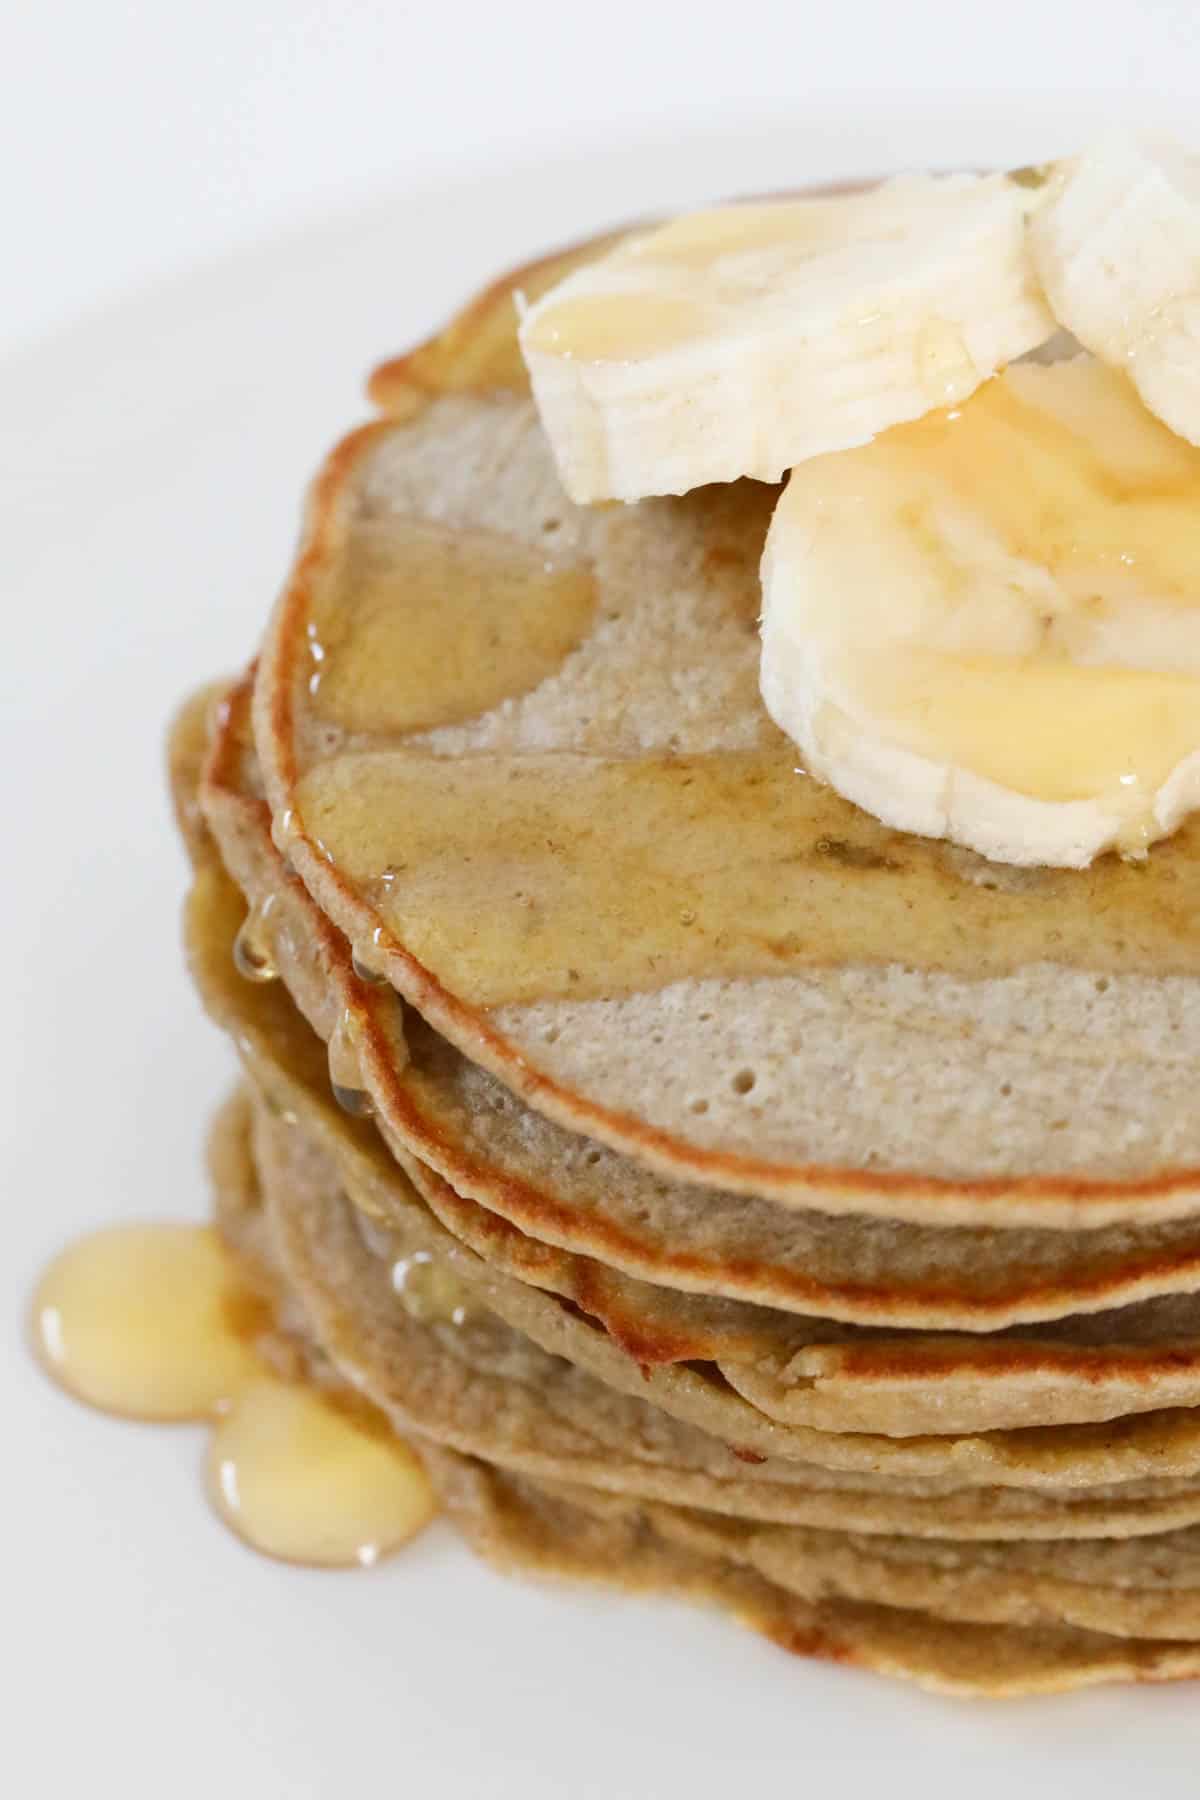 A stack of banana oat pancakes topped with sliced bananas and drizzled with maple syrup.